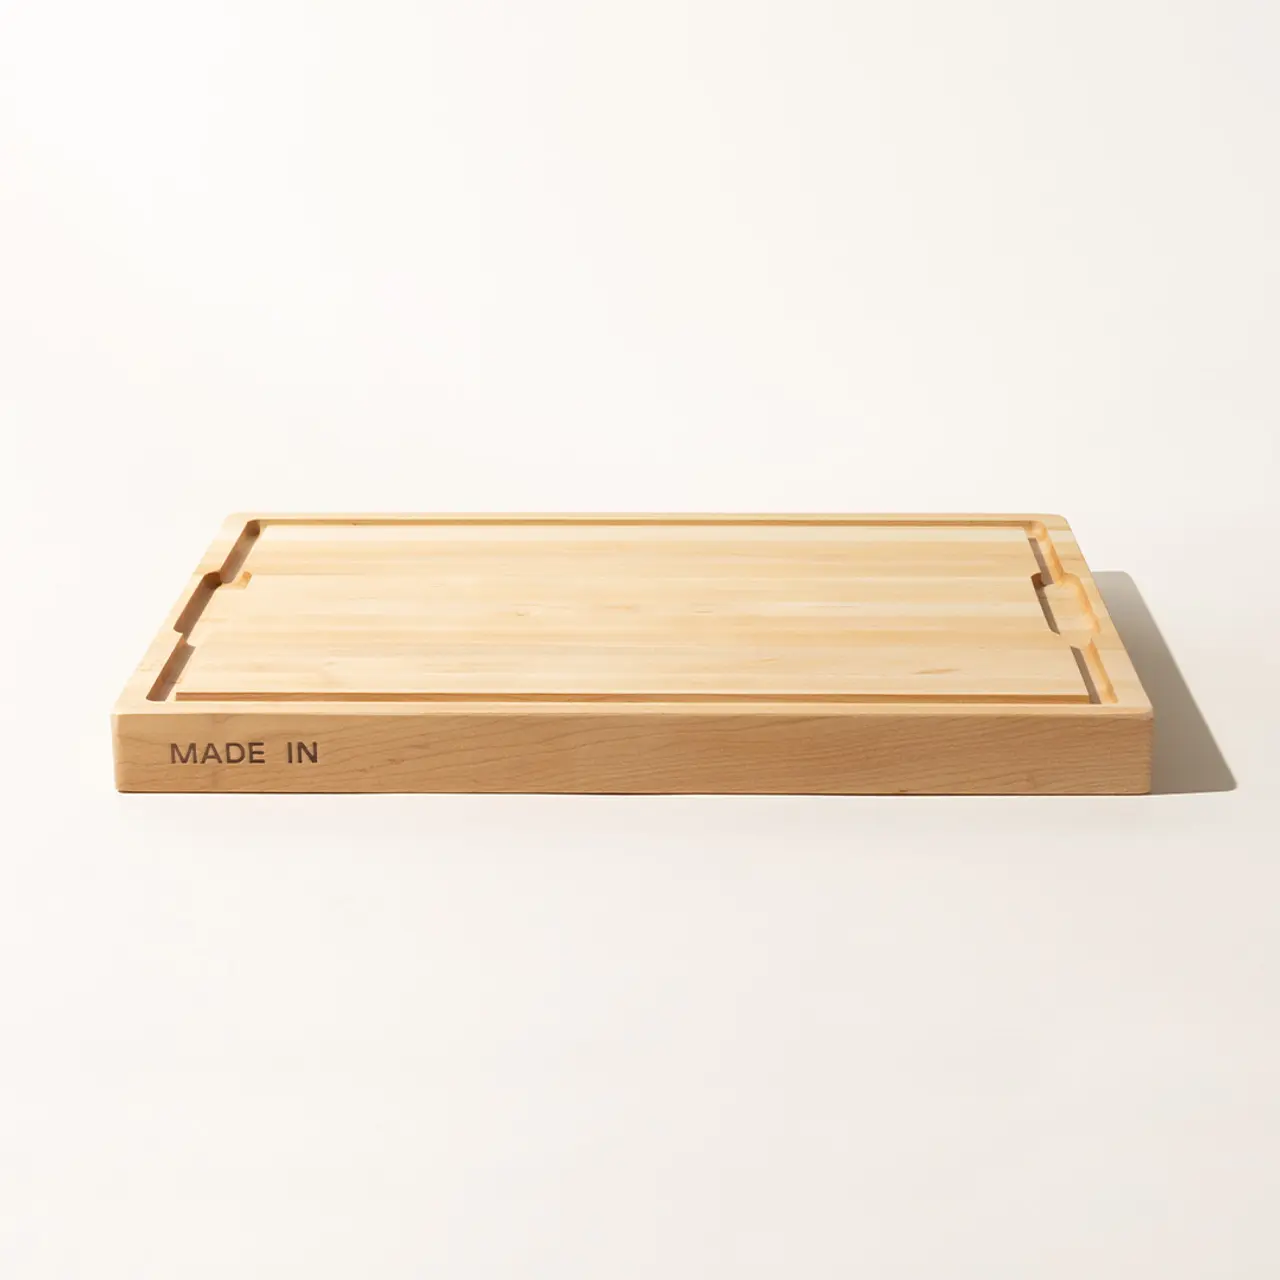 A wooden tray with "MADE IN" inscribed on one side is placed against a plain background.